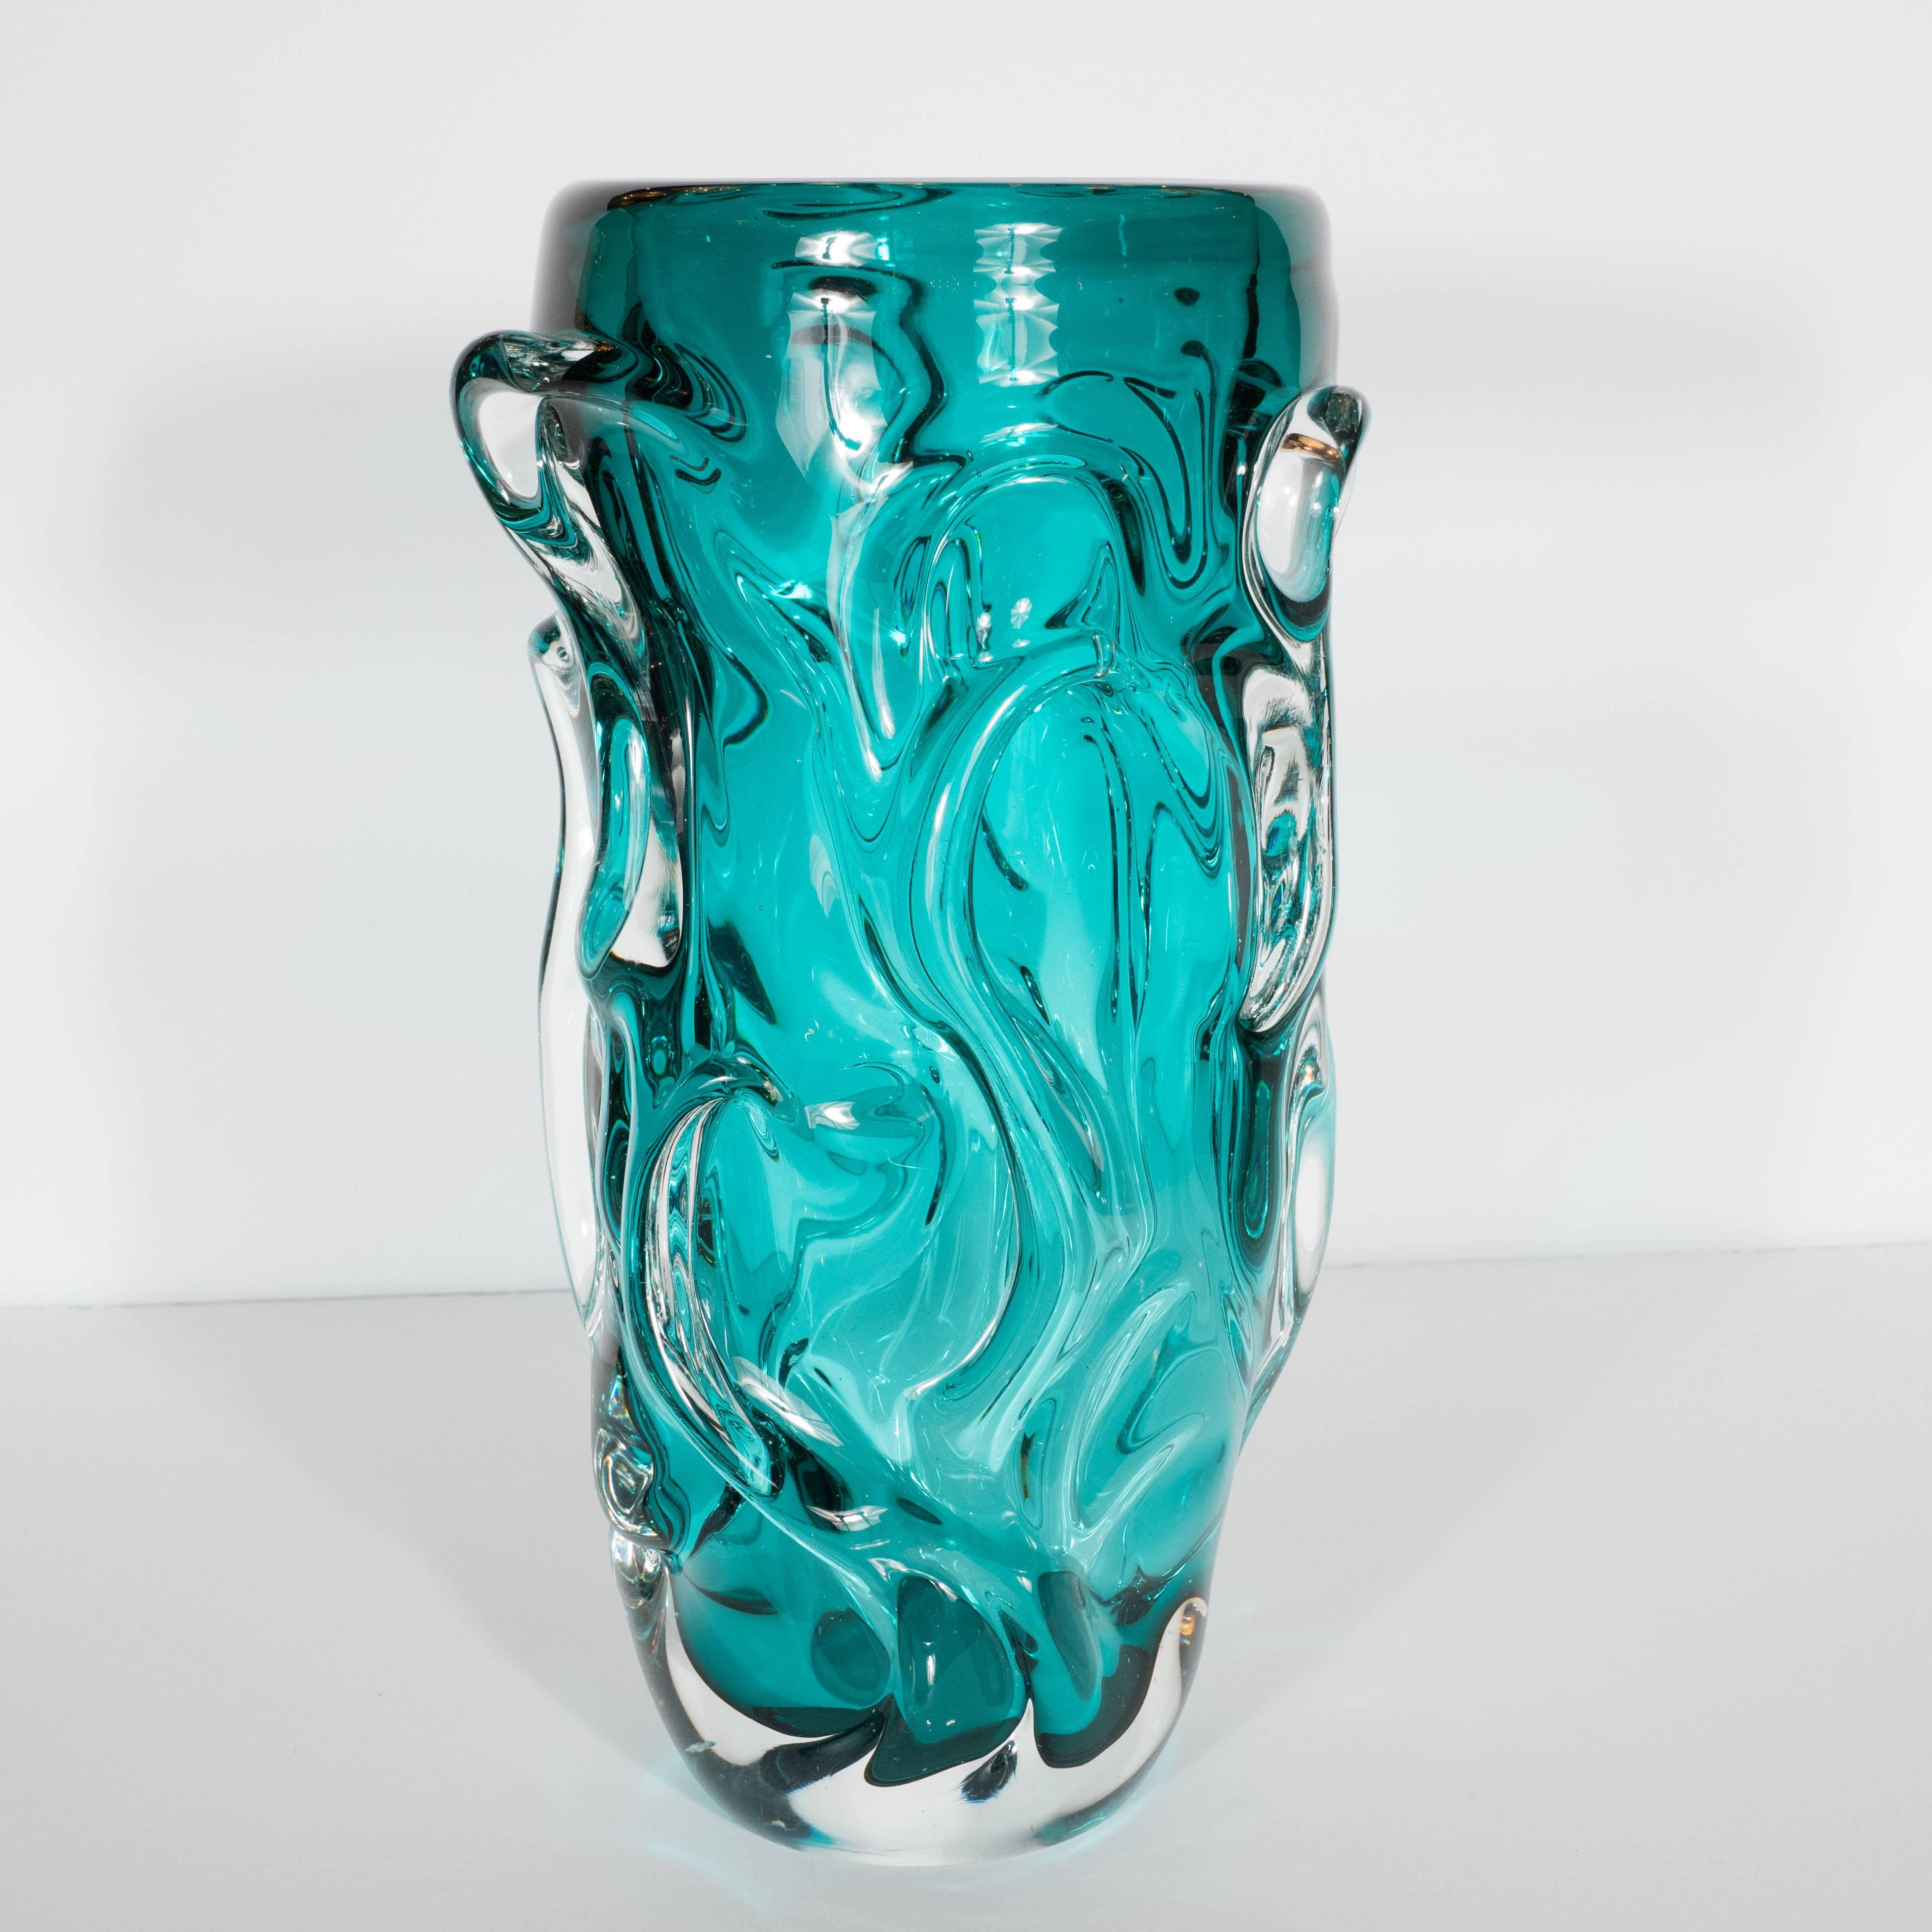 This gorgeous vase was realized in Murano, Italy, the islands off the coast of Venice that have been renowned for centuries for their superlative glass production, circa 1960. They feature highly textural exteriors composed of raised undulating